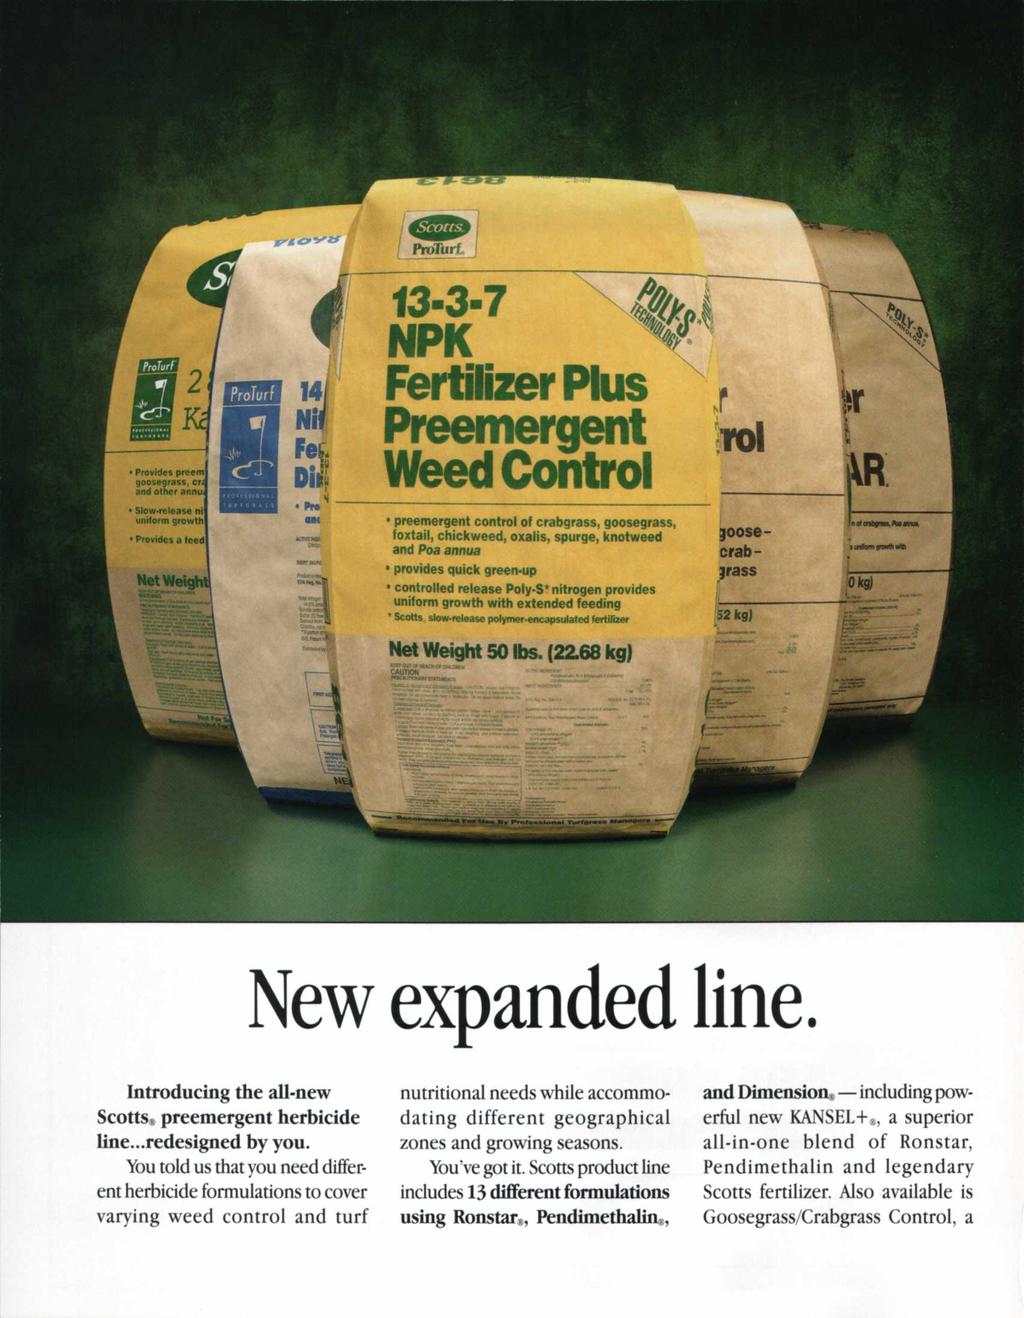 New expanded line. Introducing the all-new Scotts preemergent herbicide line...redesigned by you.